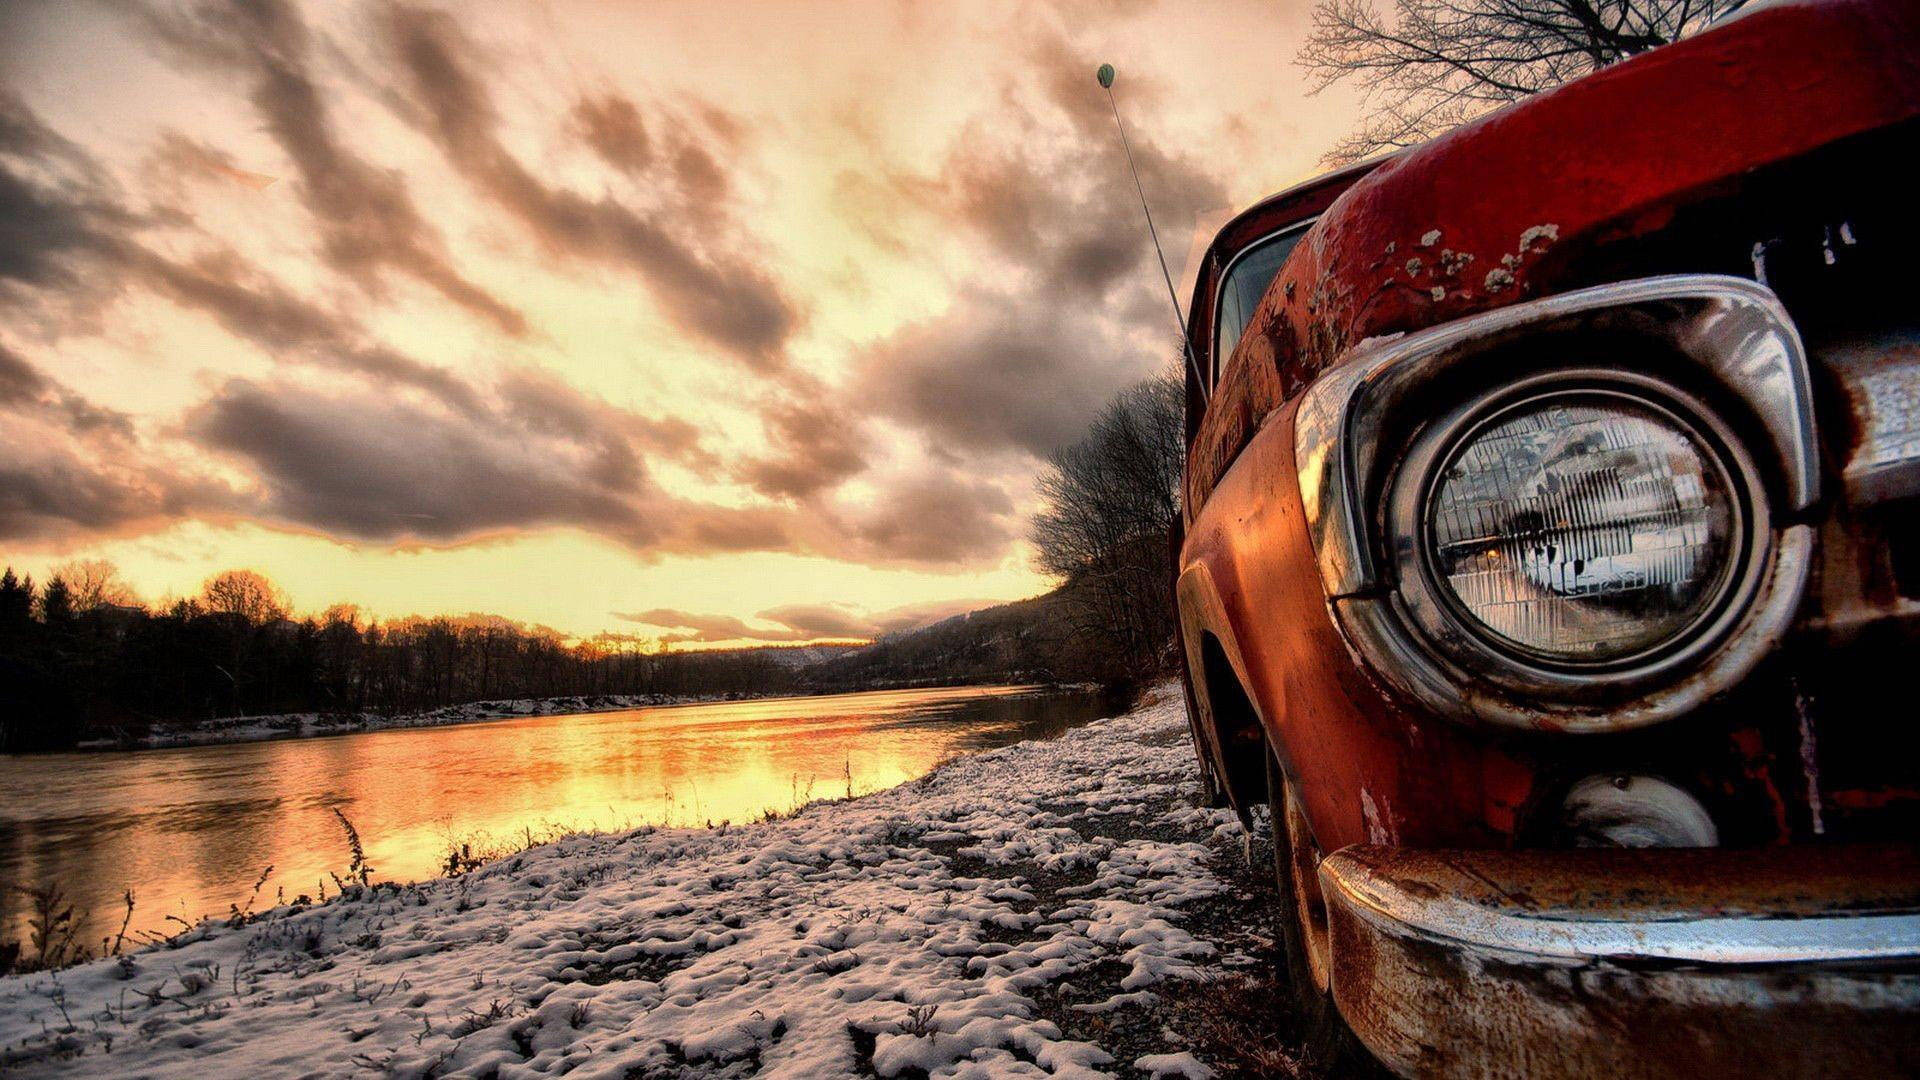 Rusty Old Car On The Riverside Wallpaper